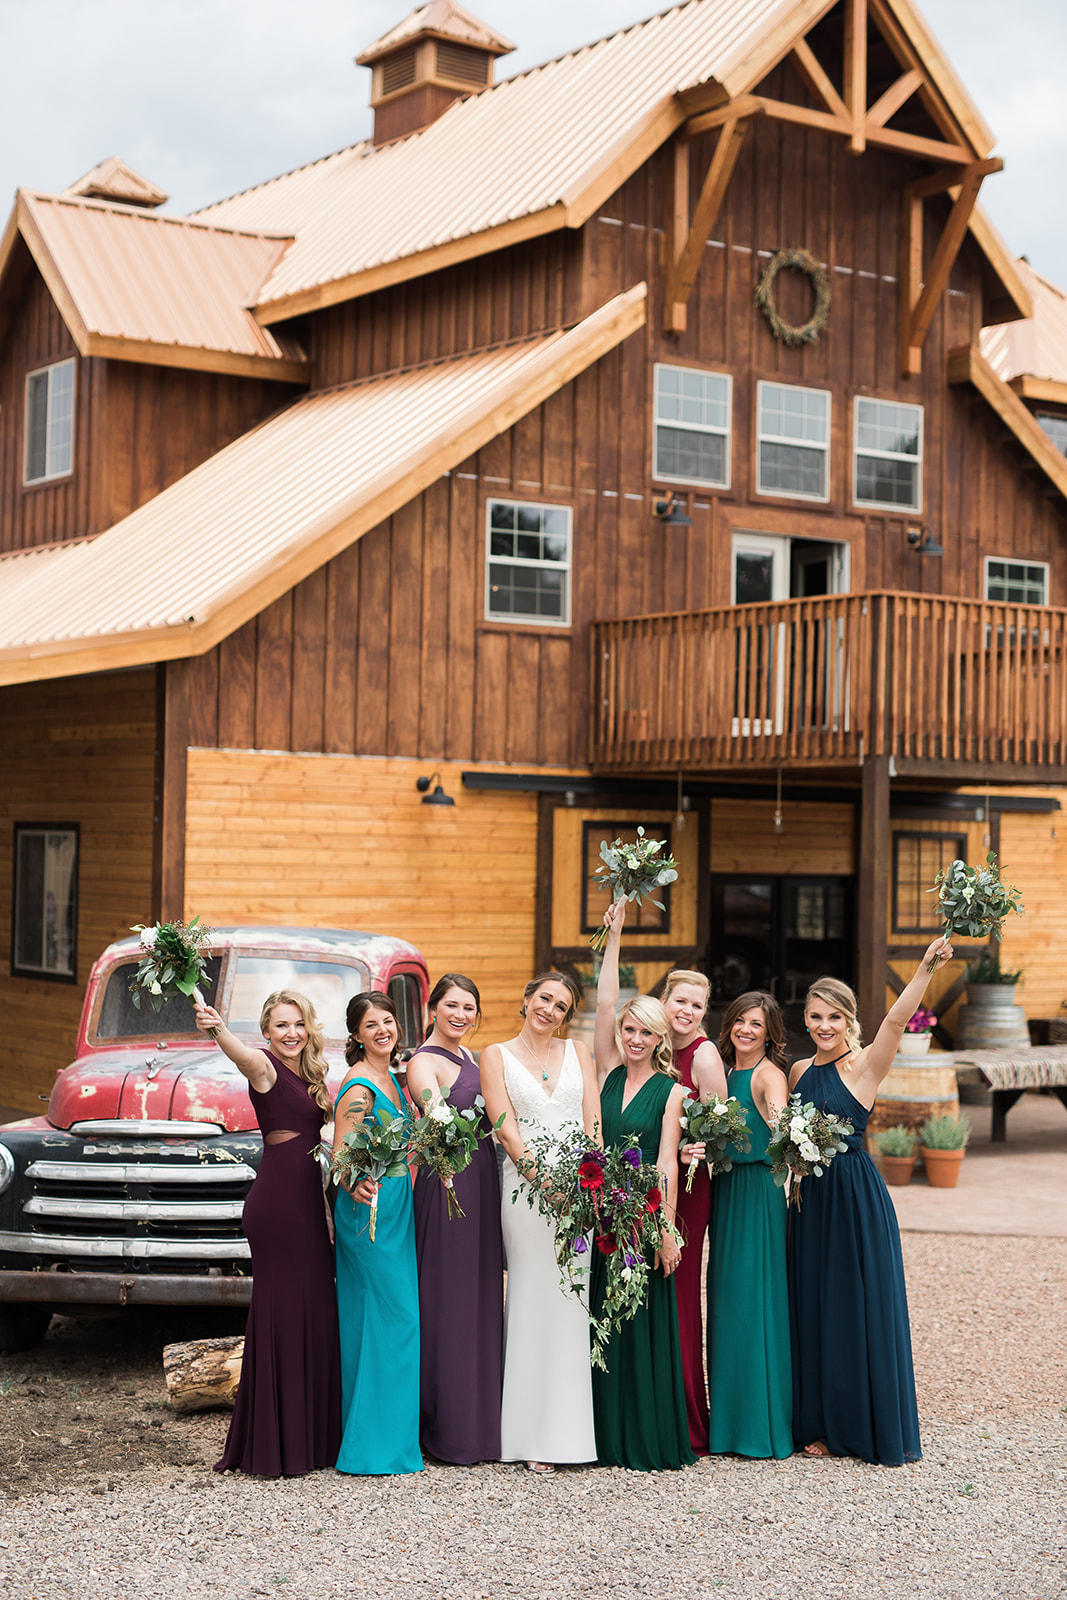 bride and bridesmaids with bouquets at barn in New Mexico wedding